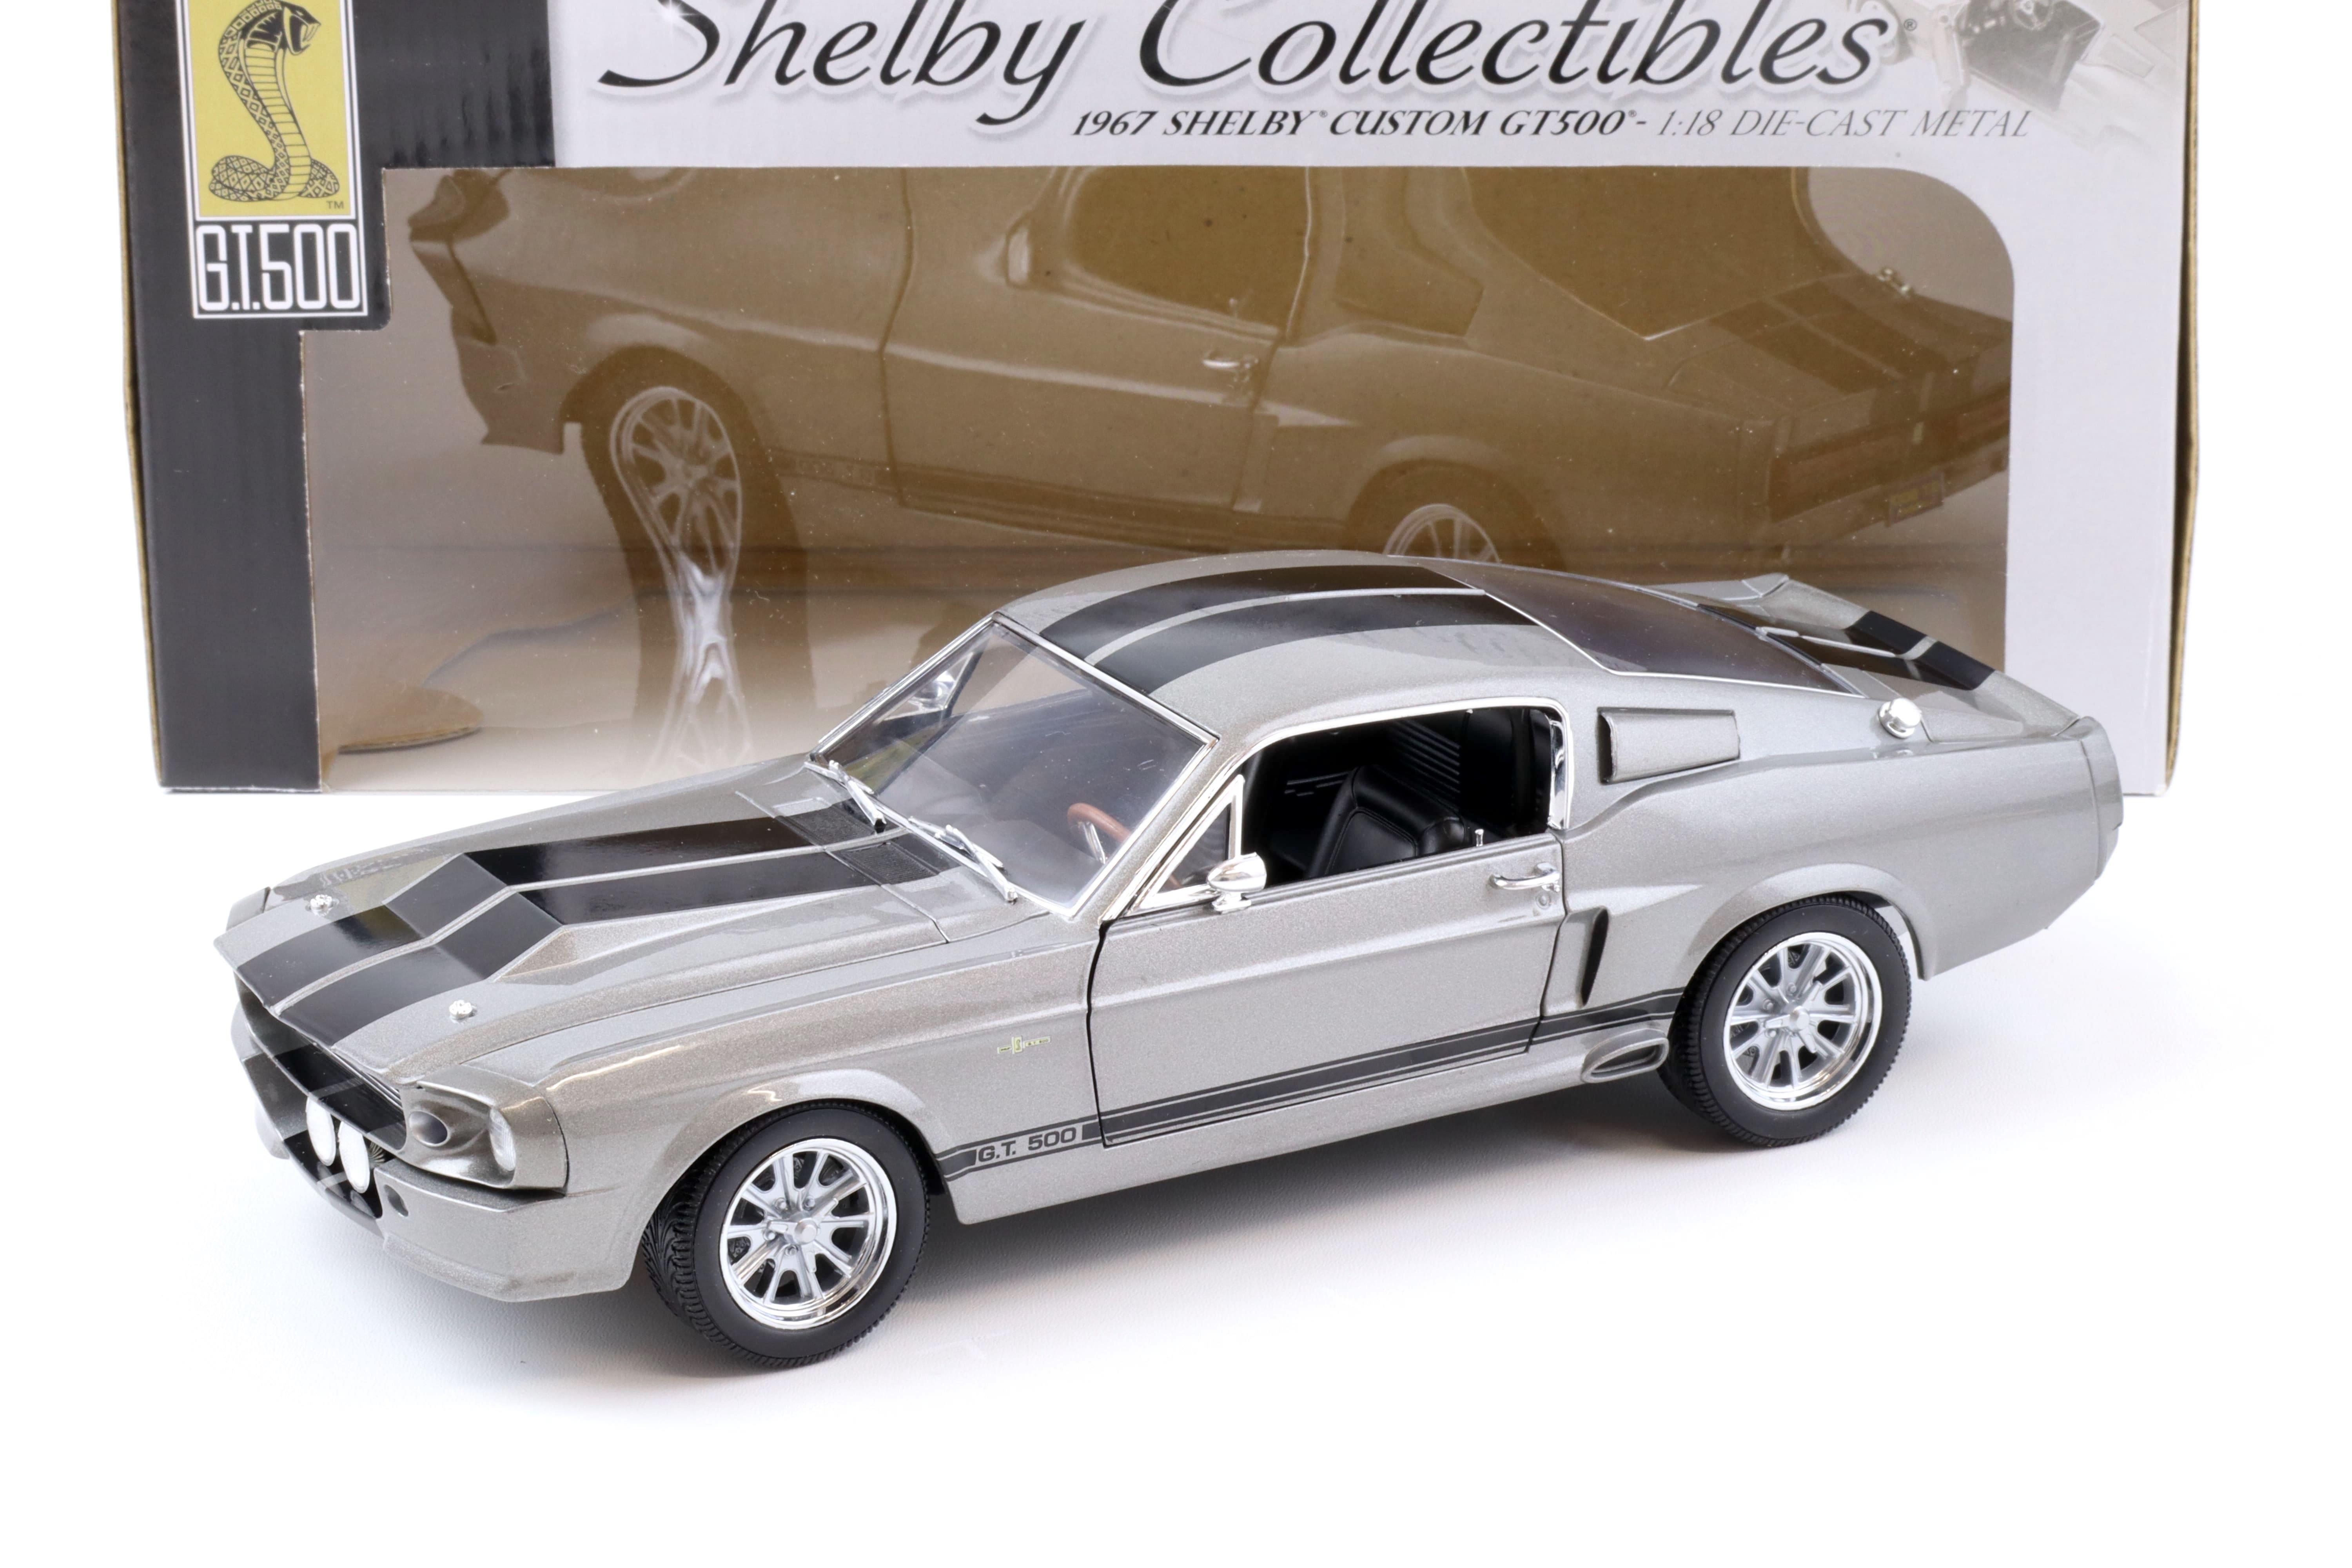 1:18 Shelby Collectibles 1967 Shelby Custom GT 500 grey/black  like ELEANOR